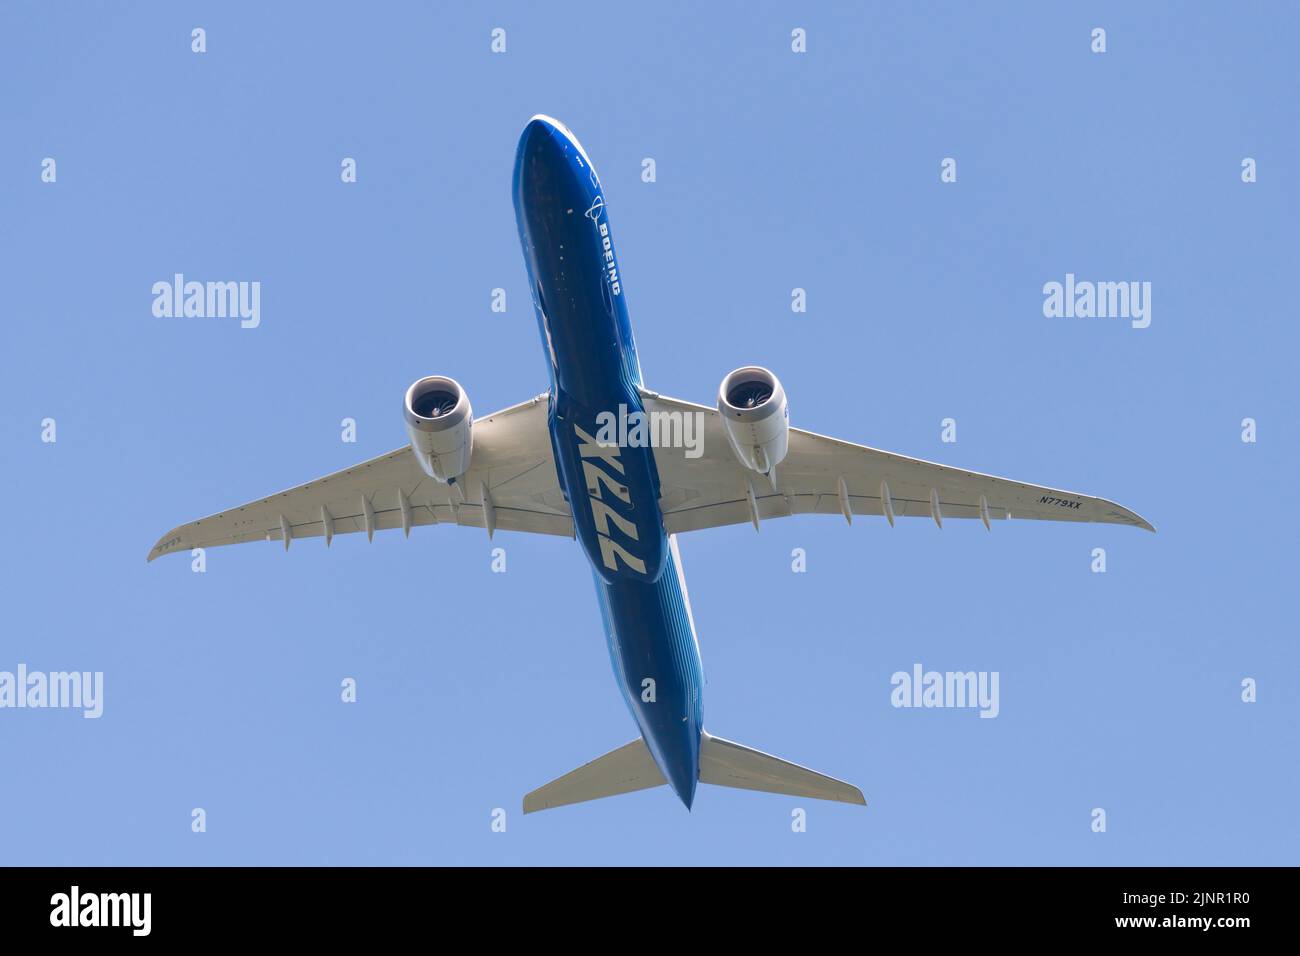 Seattle - August 12, 2022; Boeing 777X aircraft viewed from below in flight isolated againt clear blue sky in company livery Stock Photo